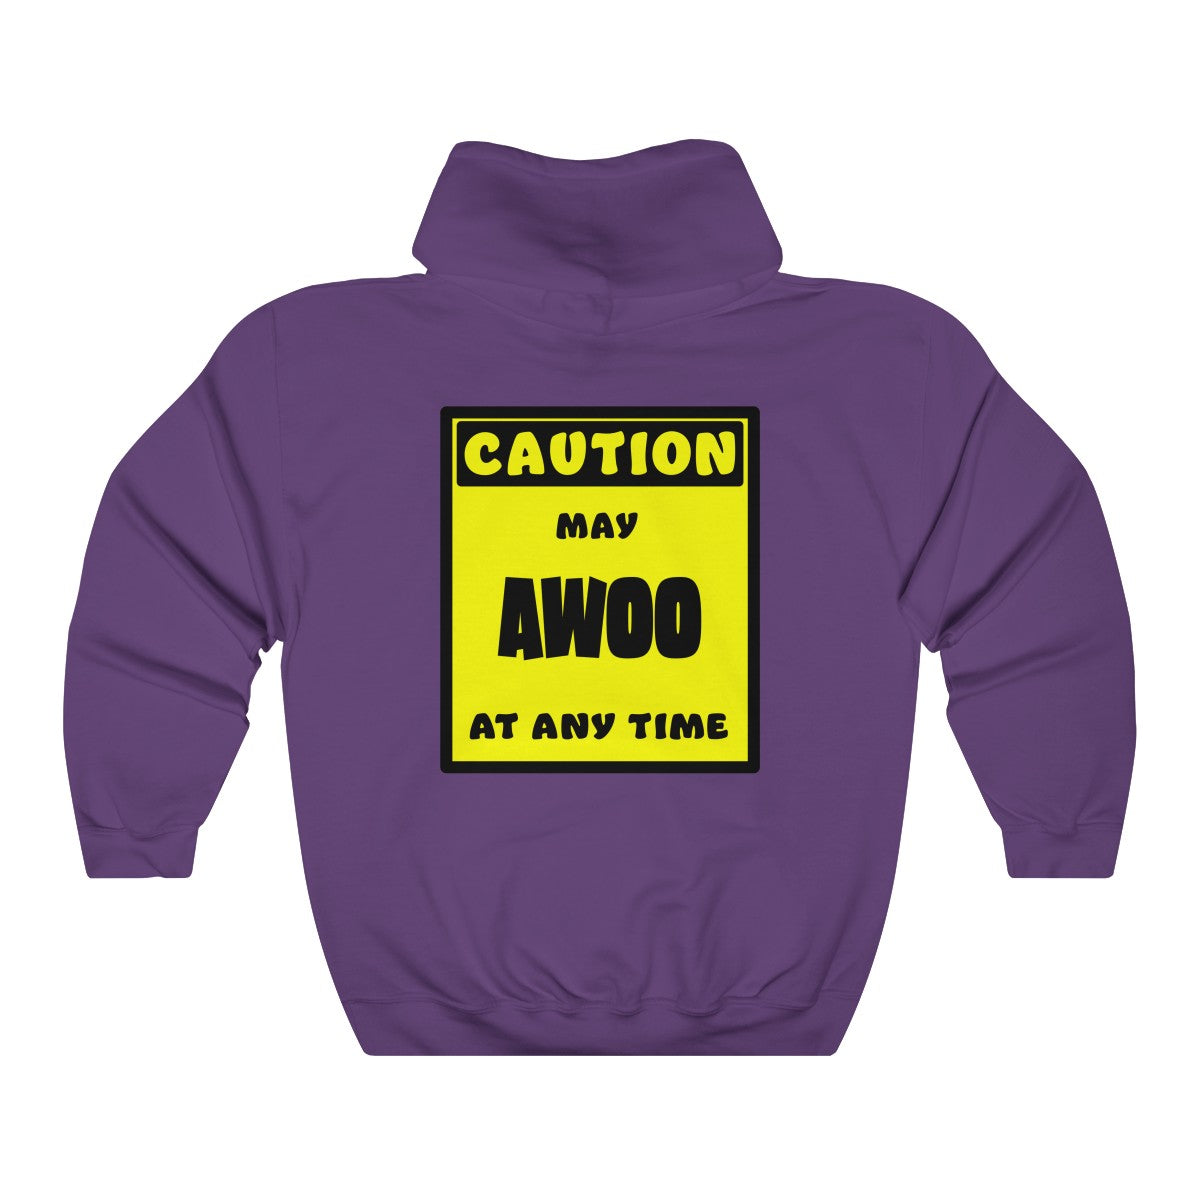 CAUTION! May AWOO at any time! - Hoodie Hoodie AFLT-Whootorca Purple S 